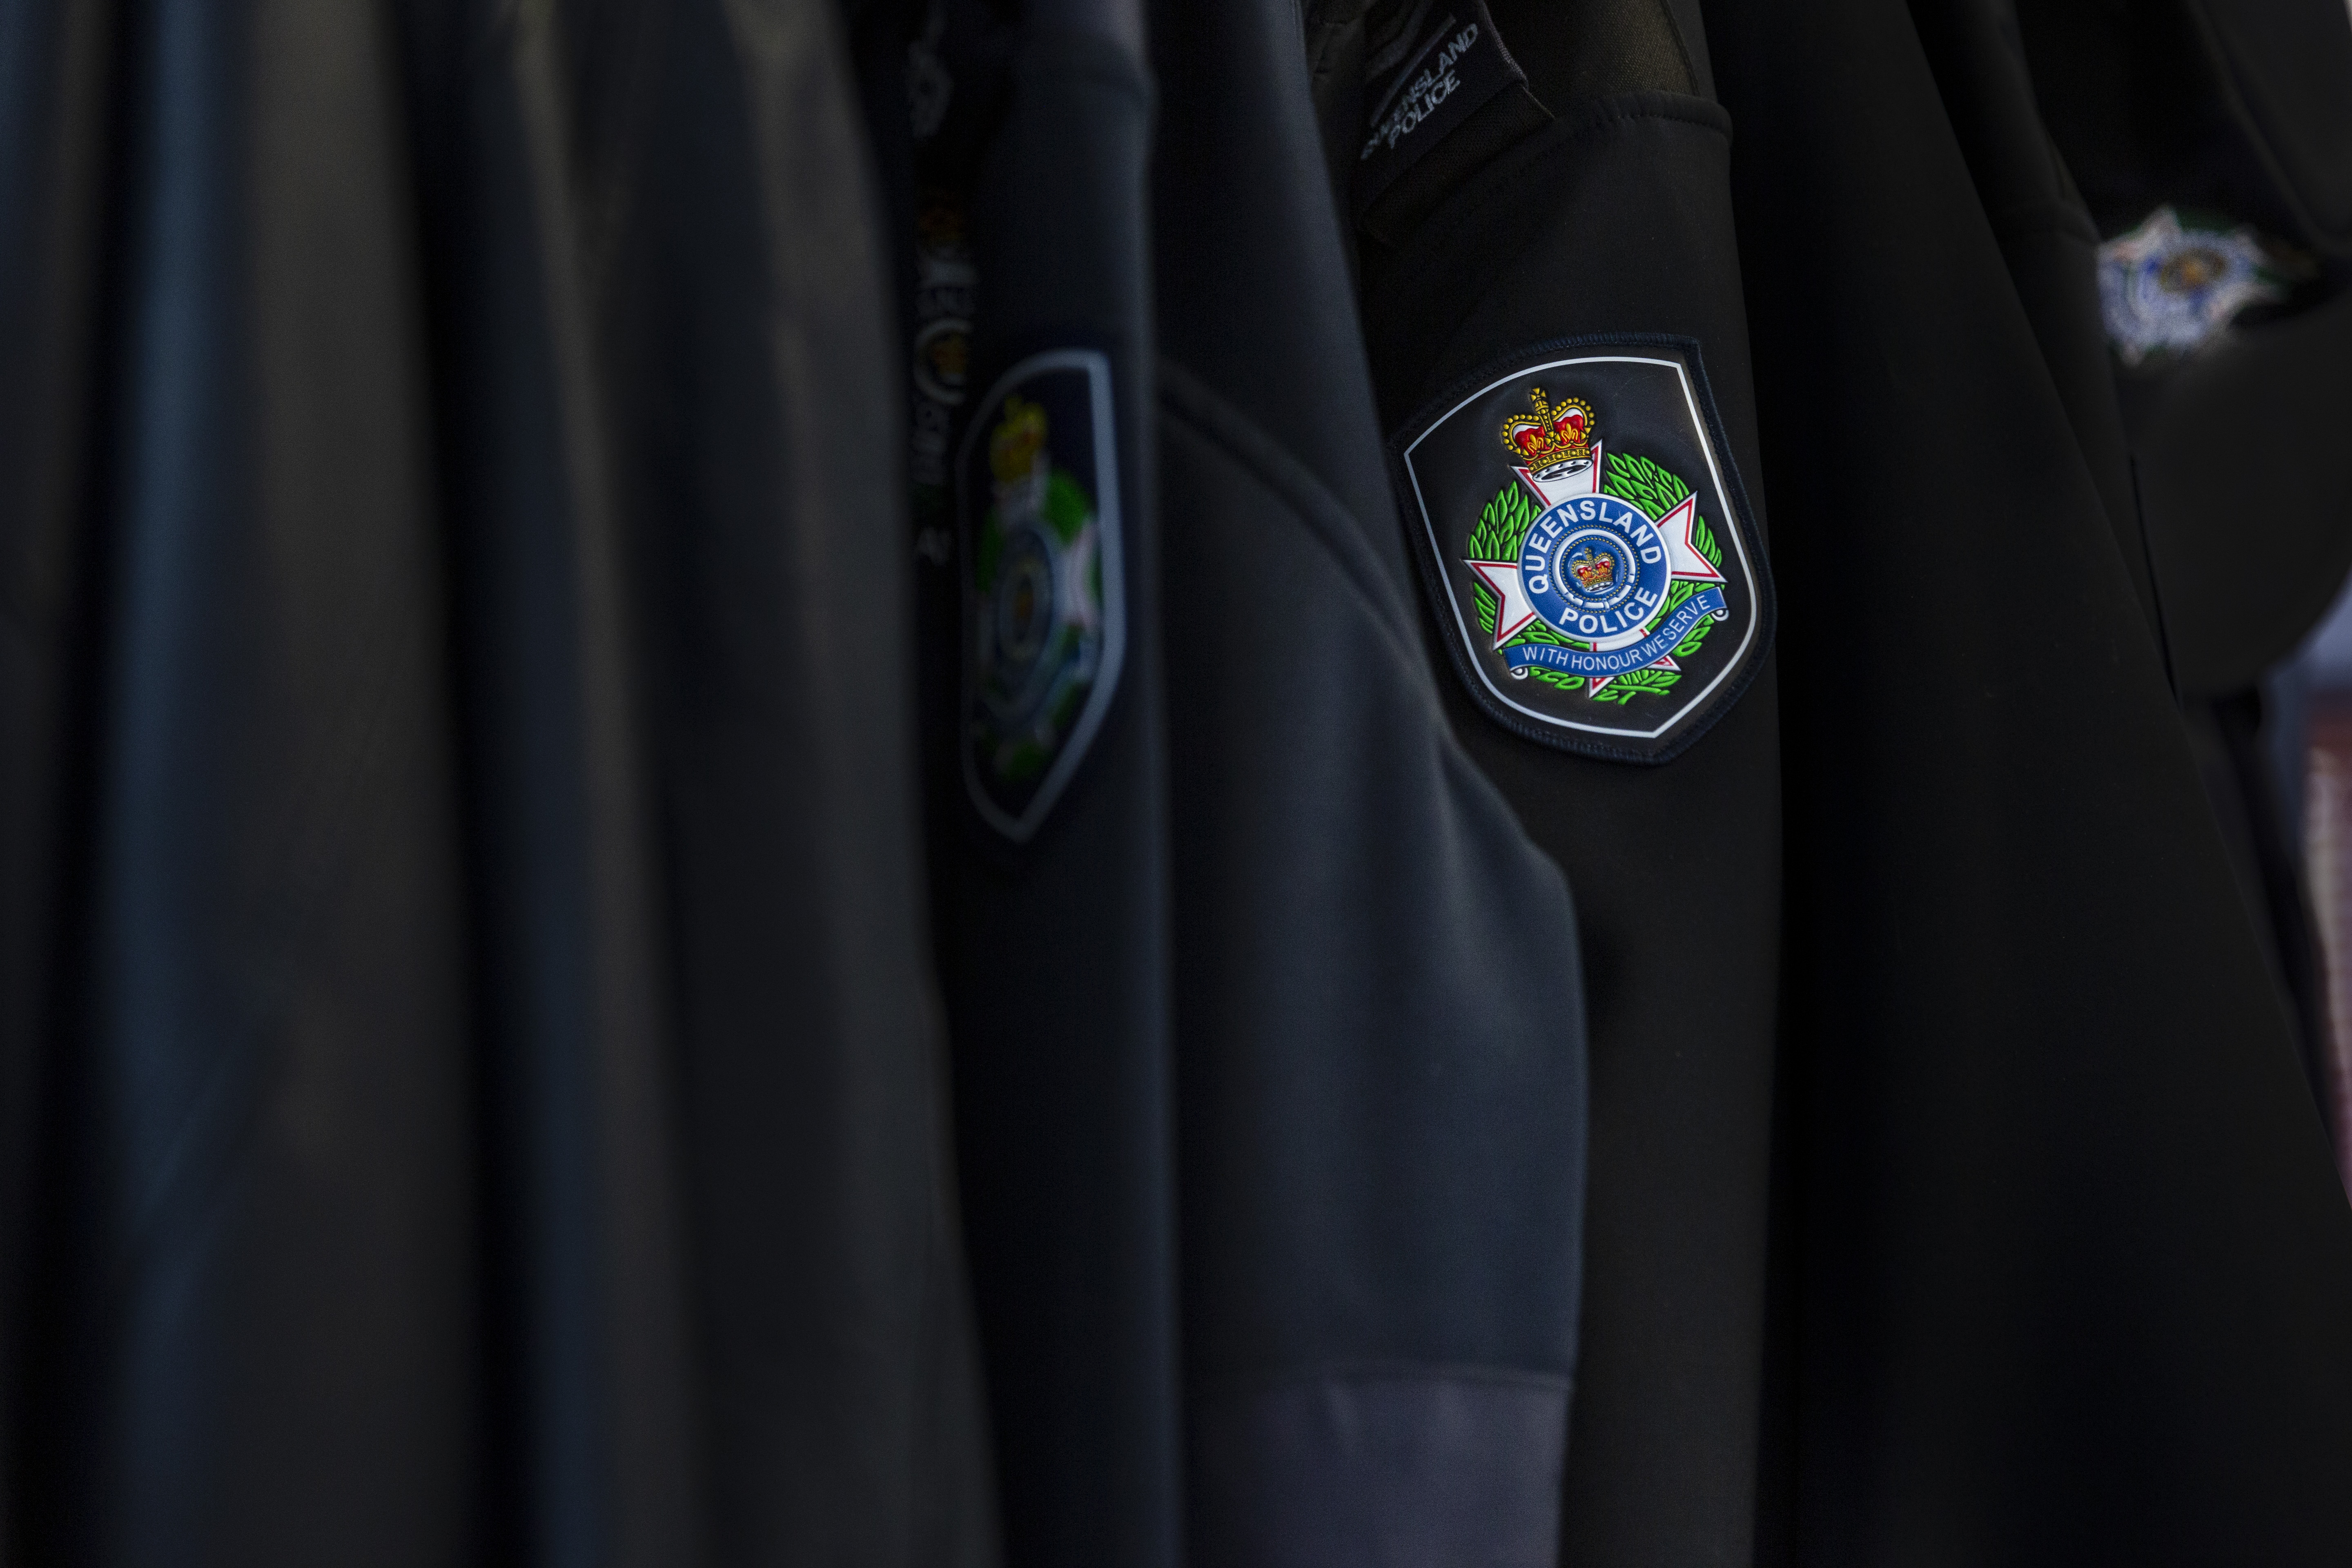 police uniform and badge